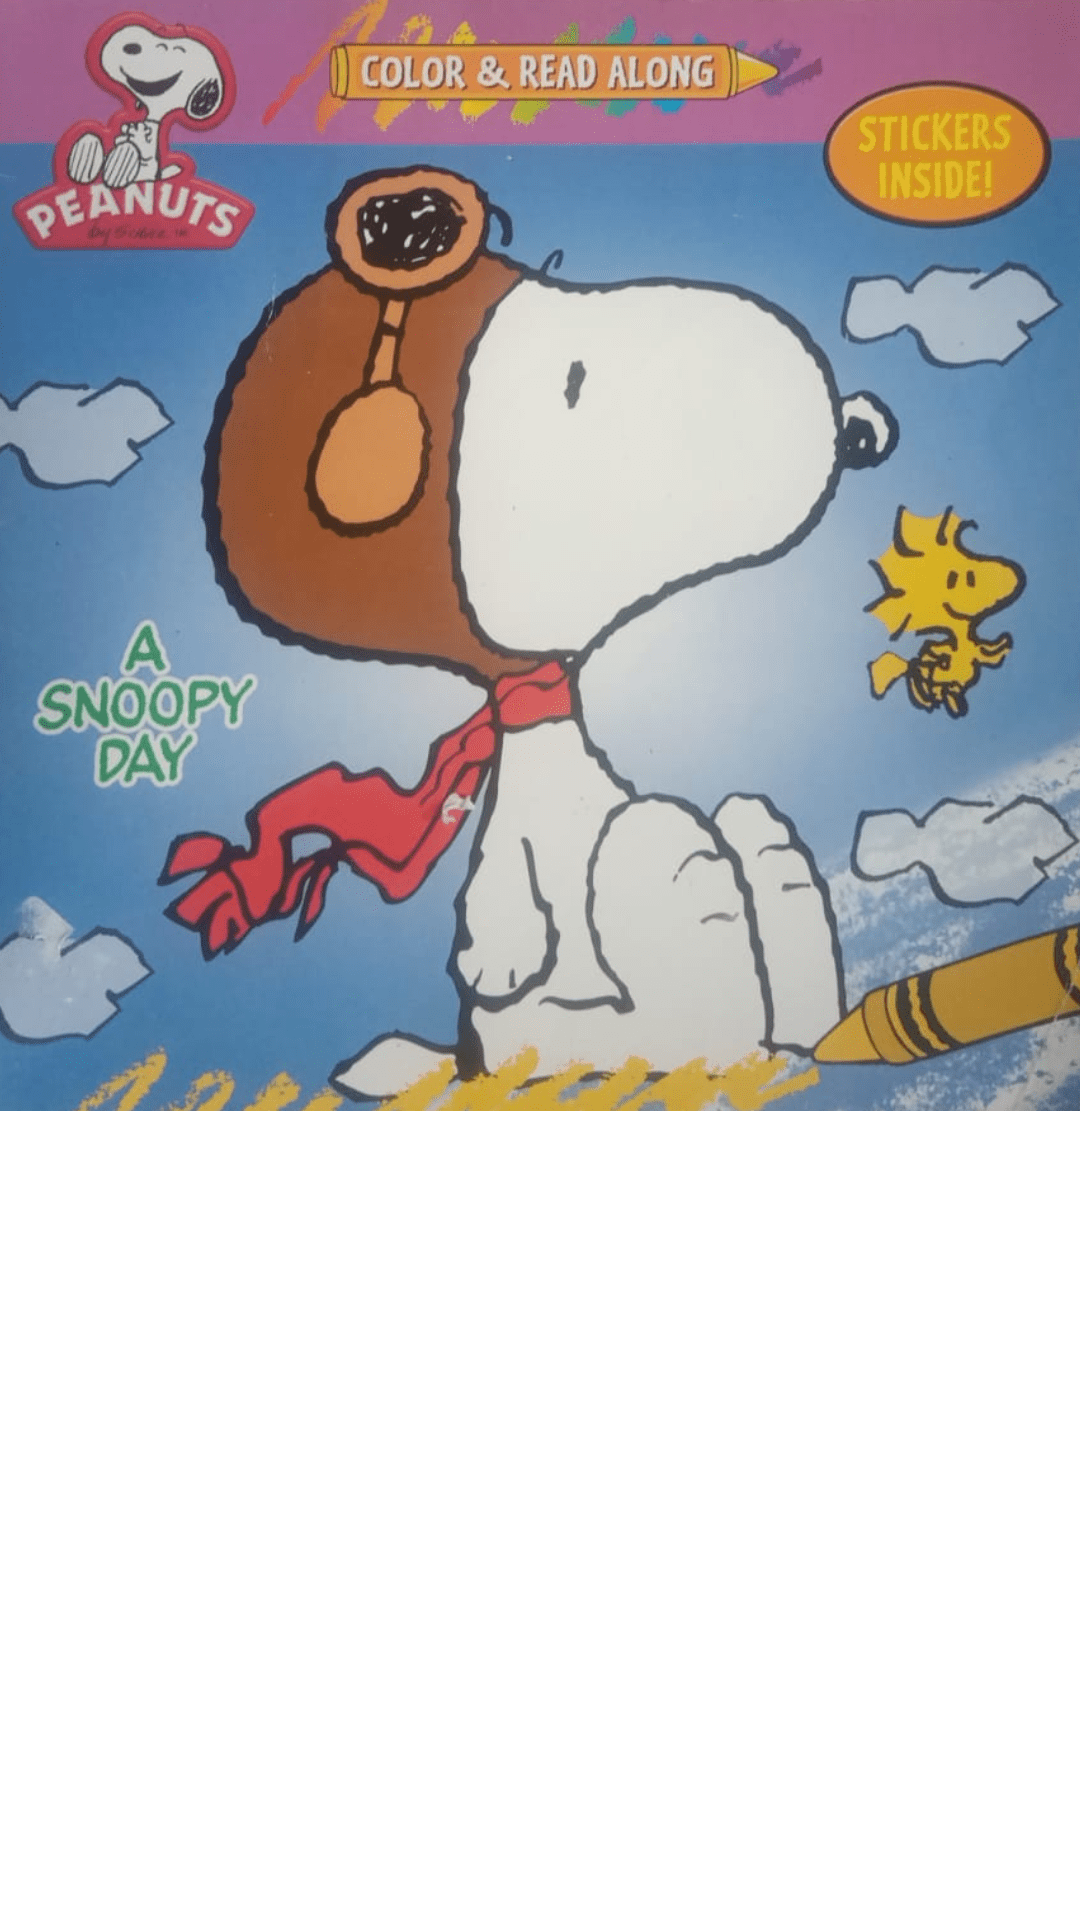 Peanuts : A snoopy Day